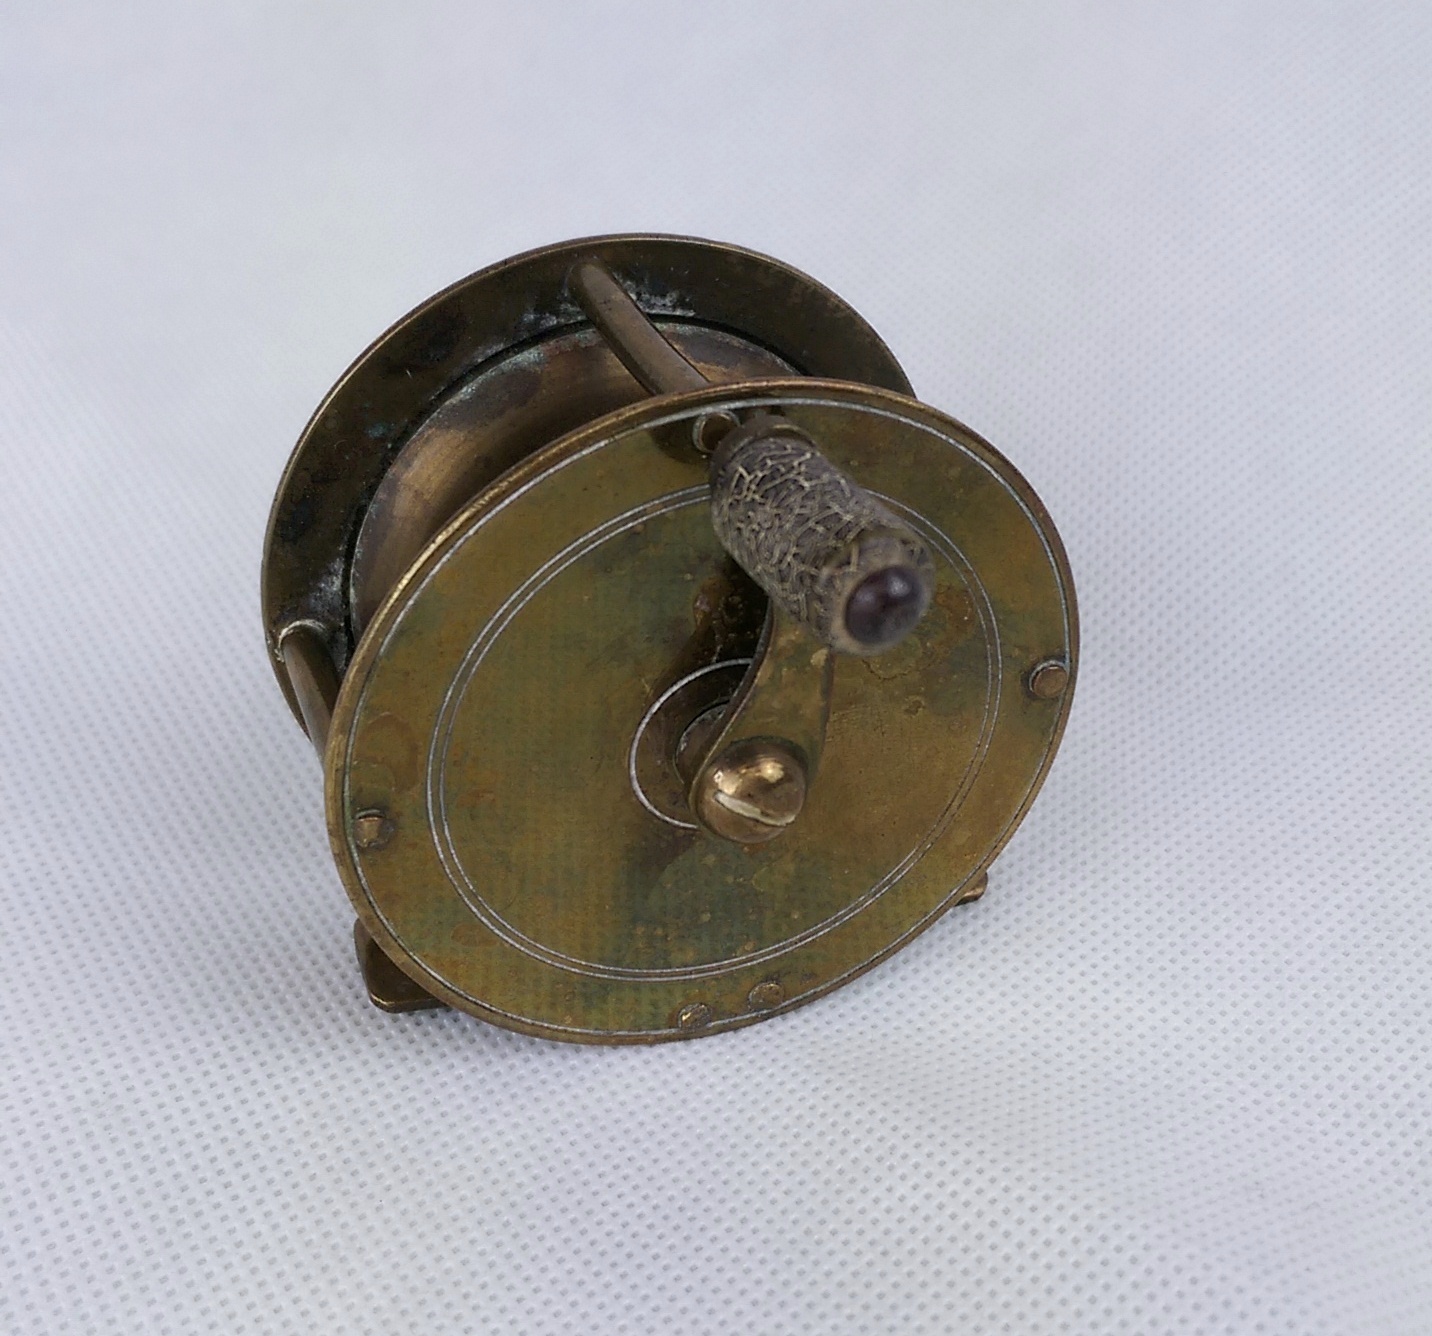 Buy Vintage Small Brass Fly Reel Uncleaned / Antique Fishing Reel Brass Fly  Reel Online in India 